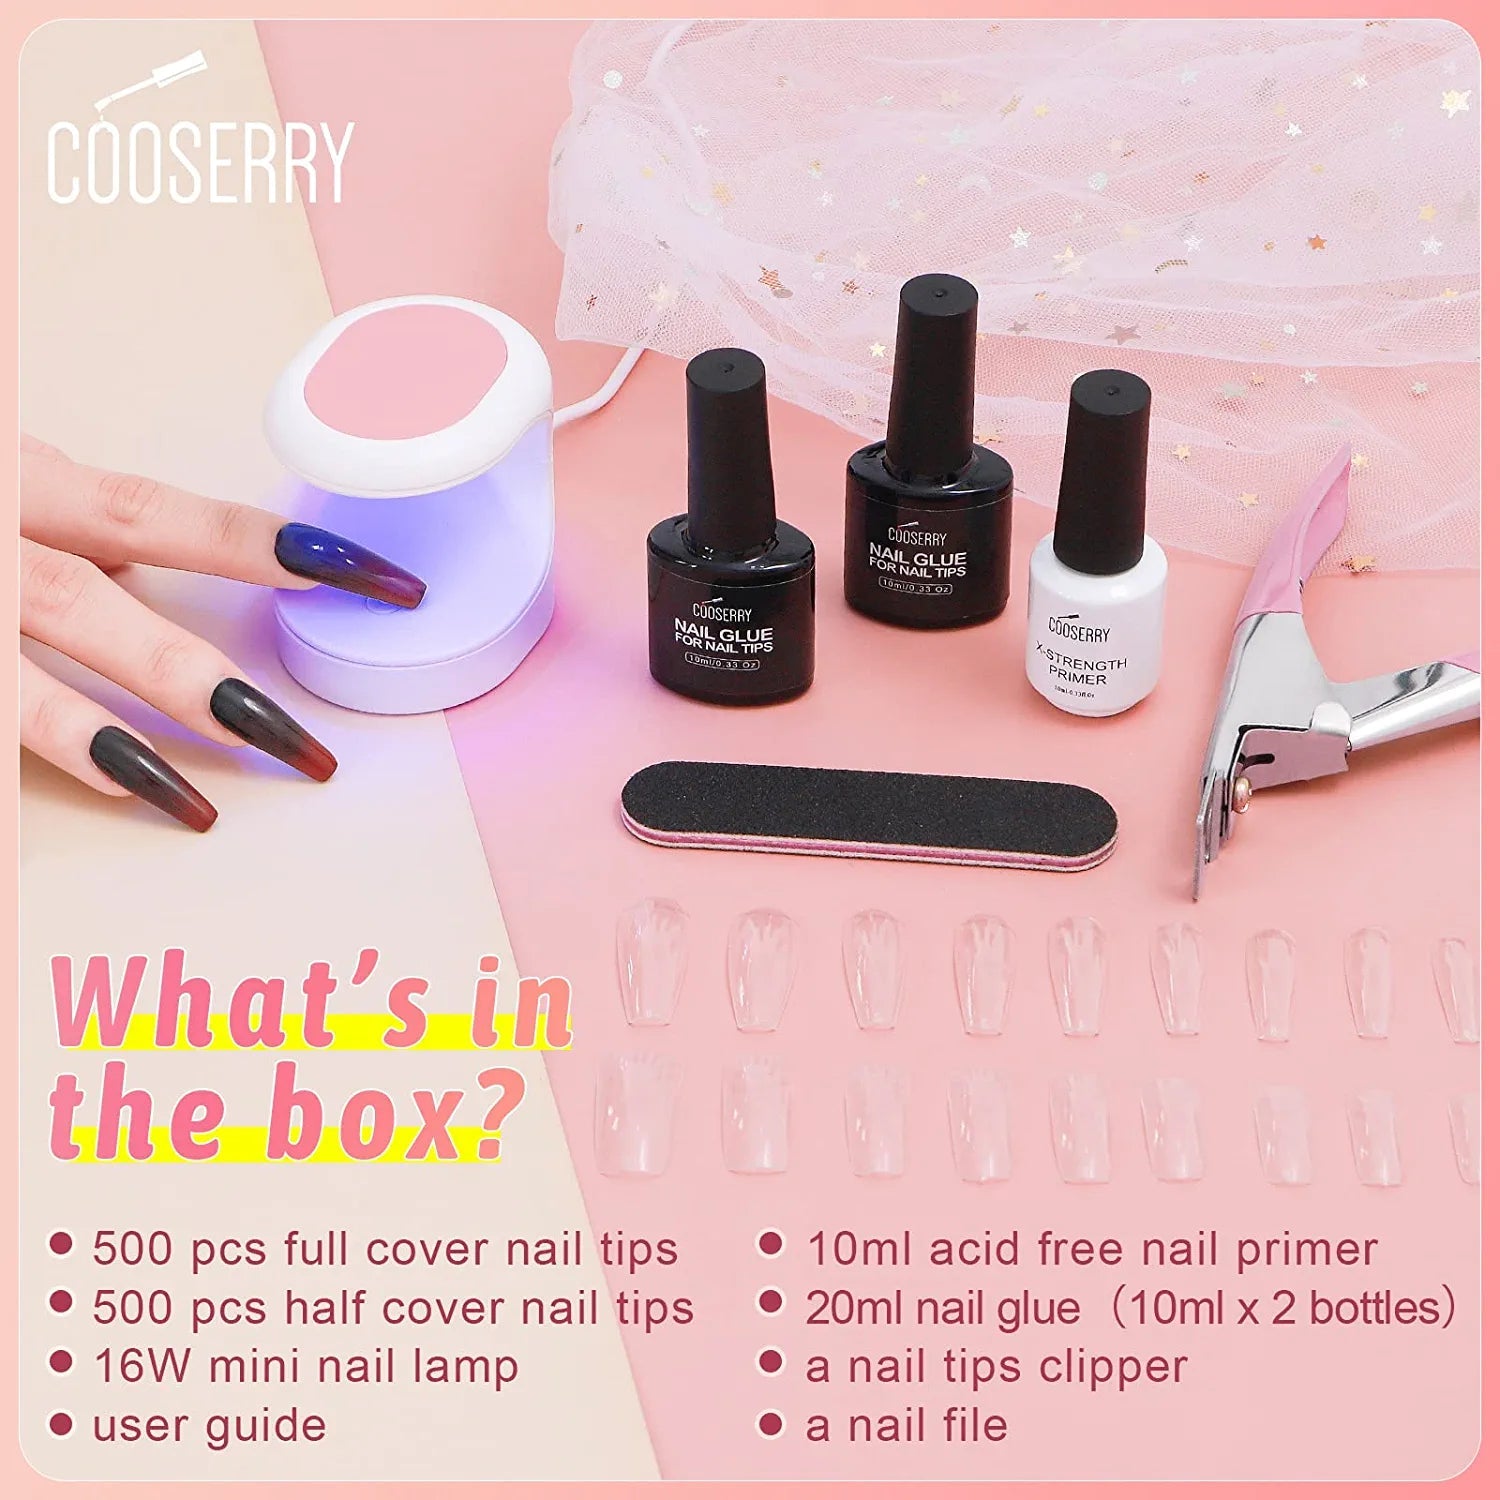 1000pcs Full Cover Coffin and C Curve Nails Tips - Cooserry